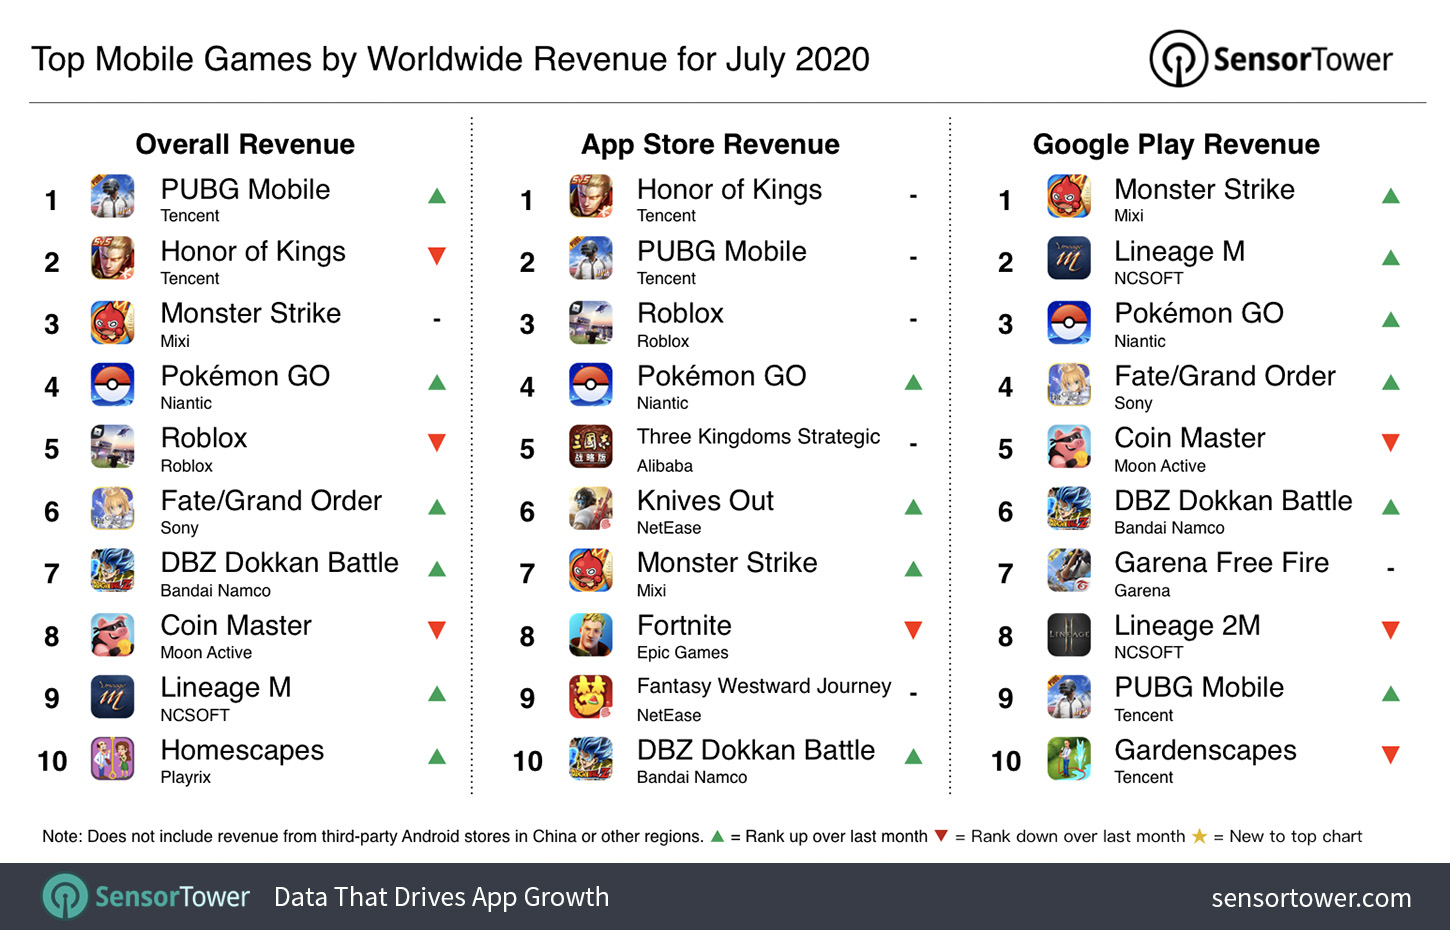 “Top Grossing Mobile Games Worldwide for July 2020